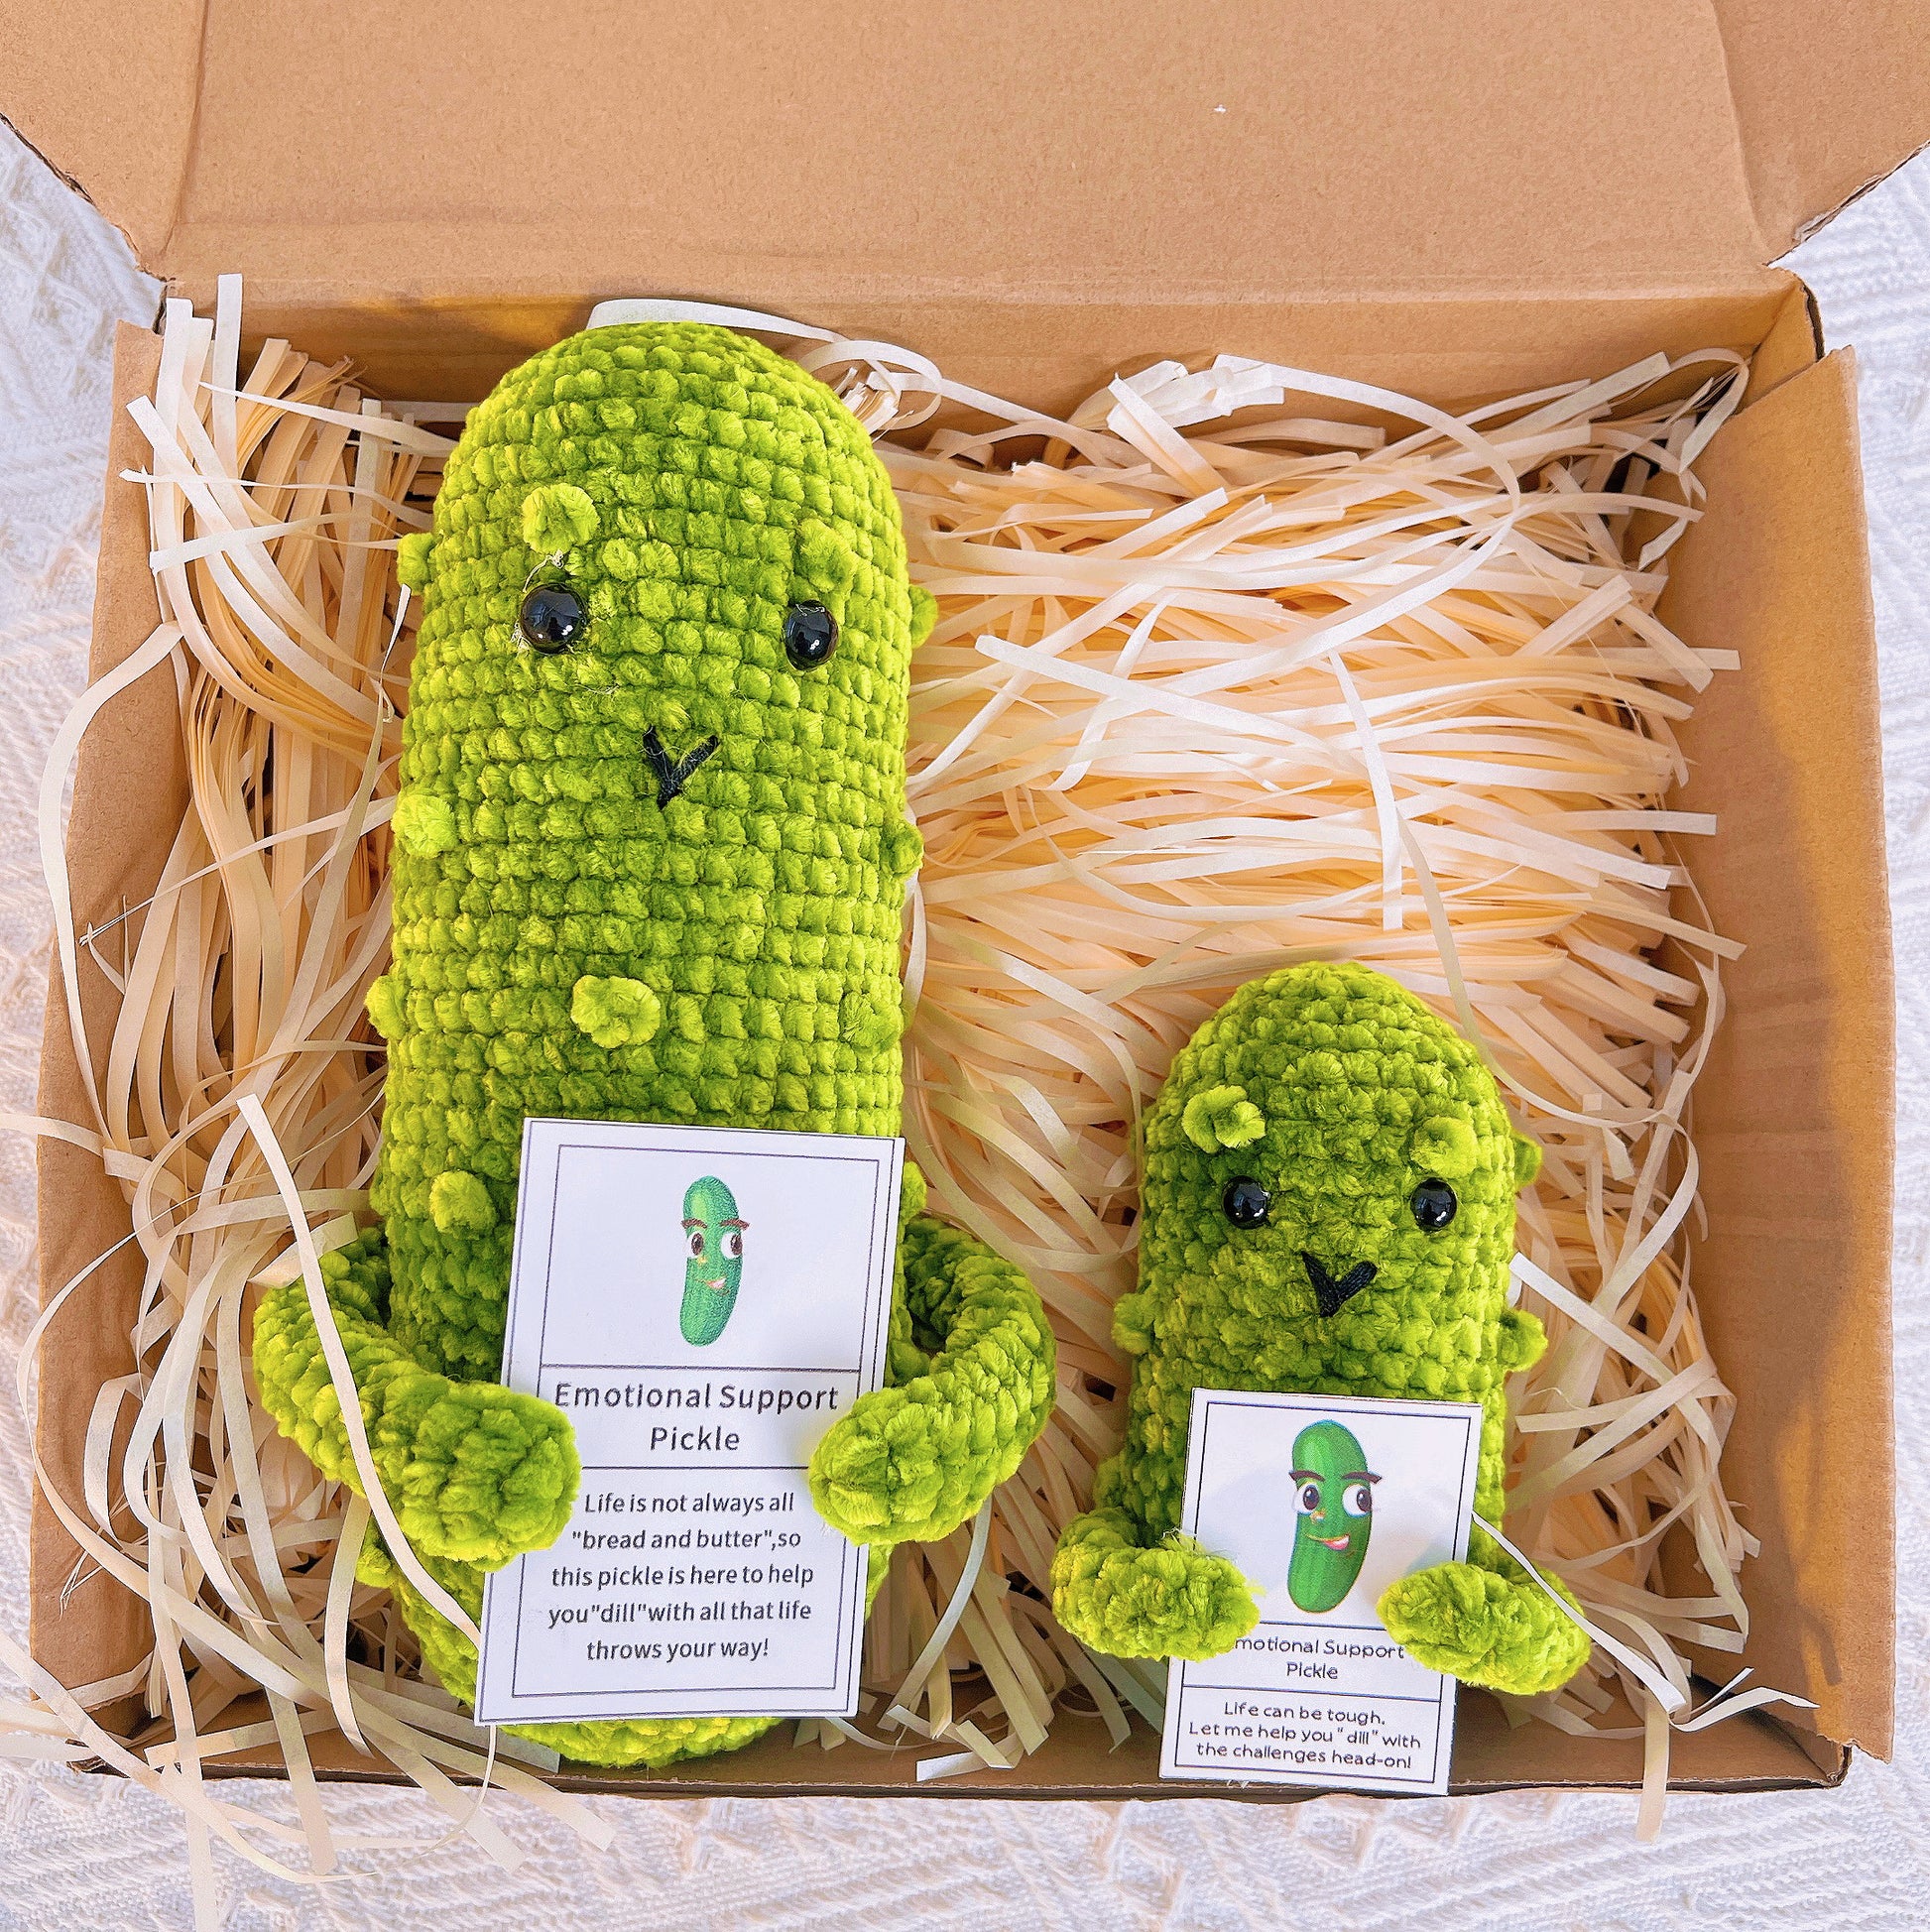 Custom Text Emotional Support Pickles for Bundle Set New Year Resoluti –  The Bloom Crafter